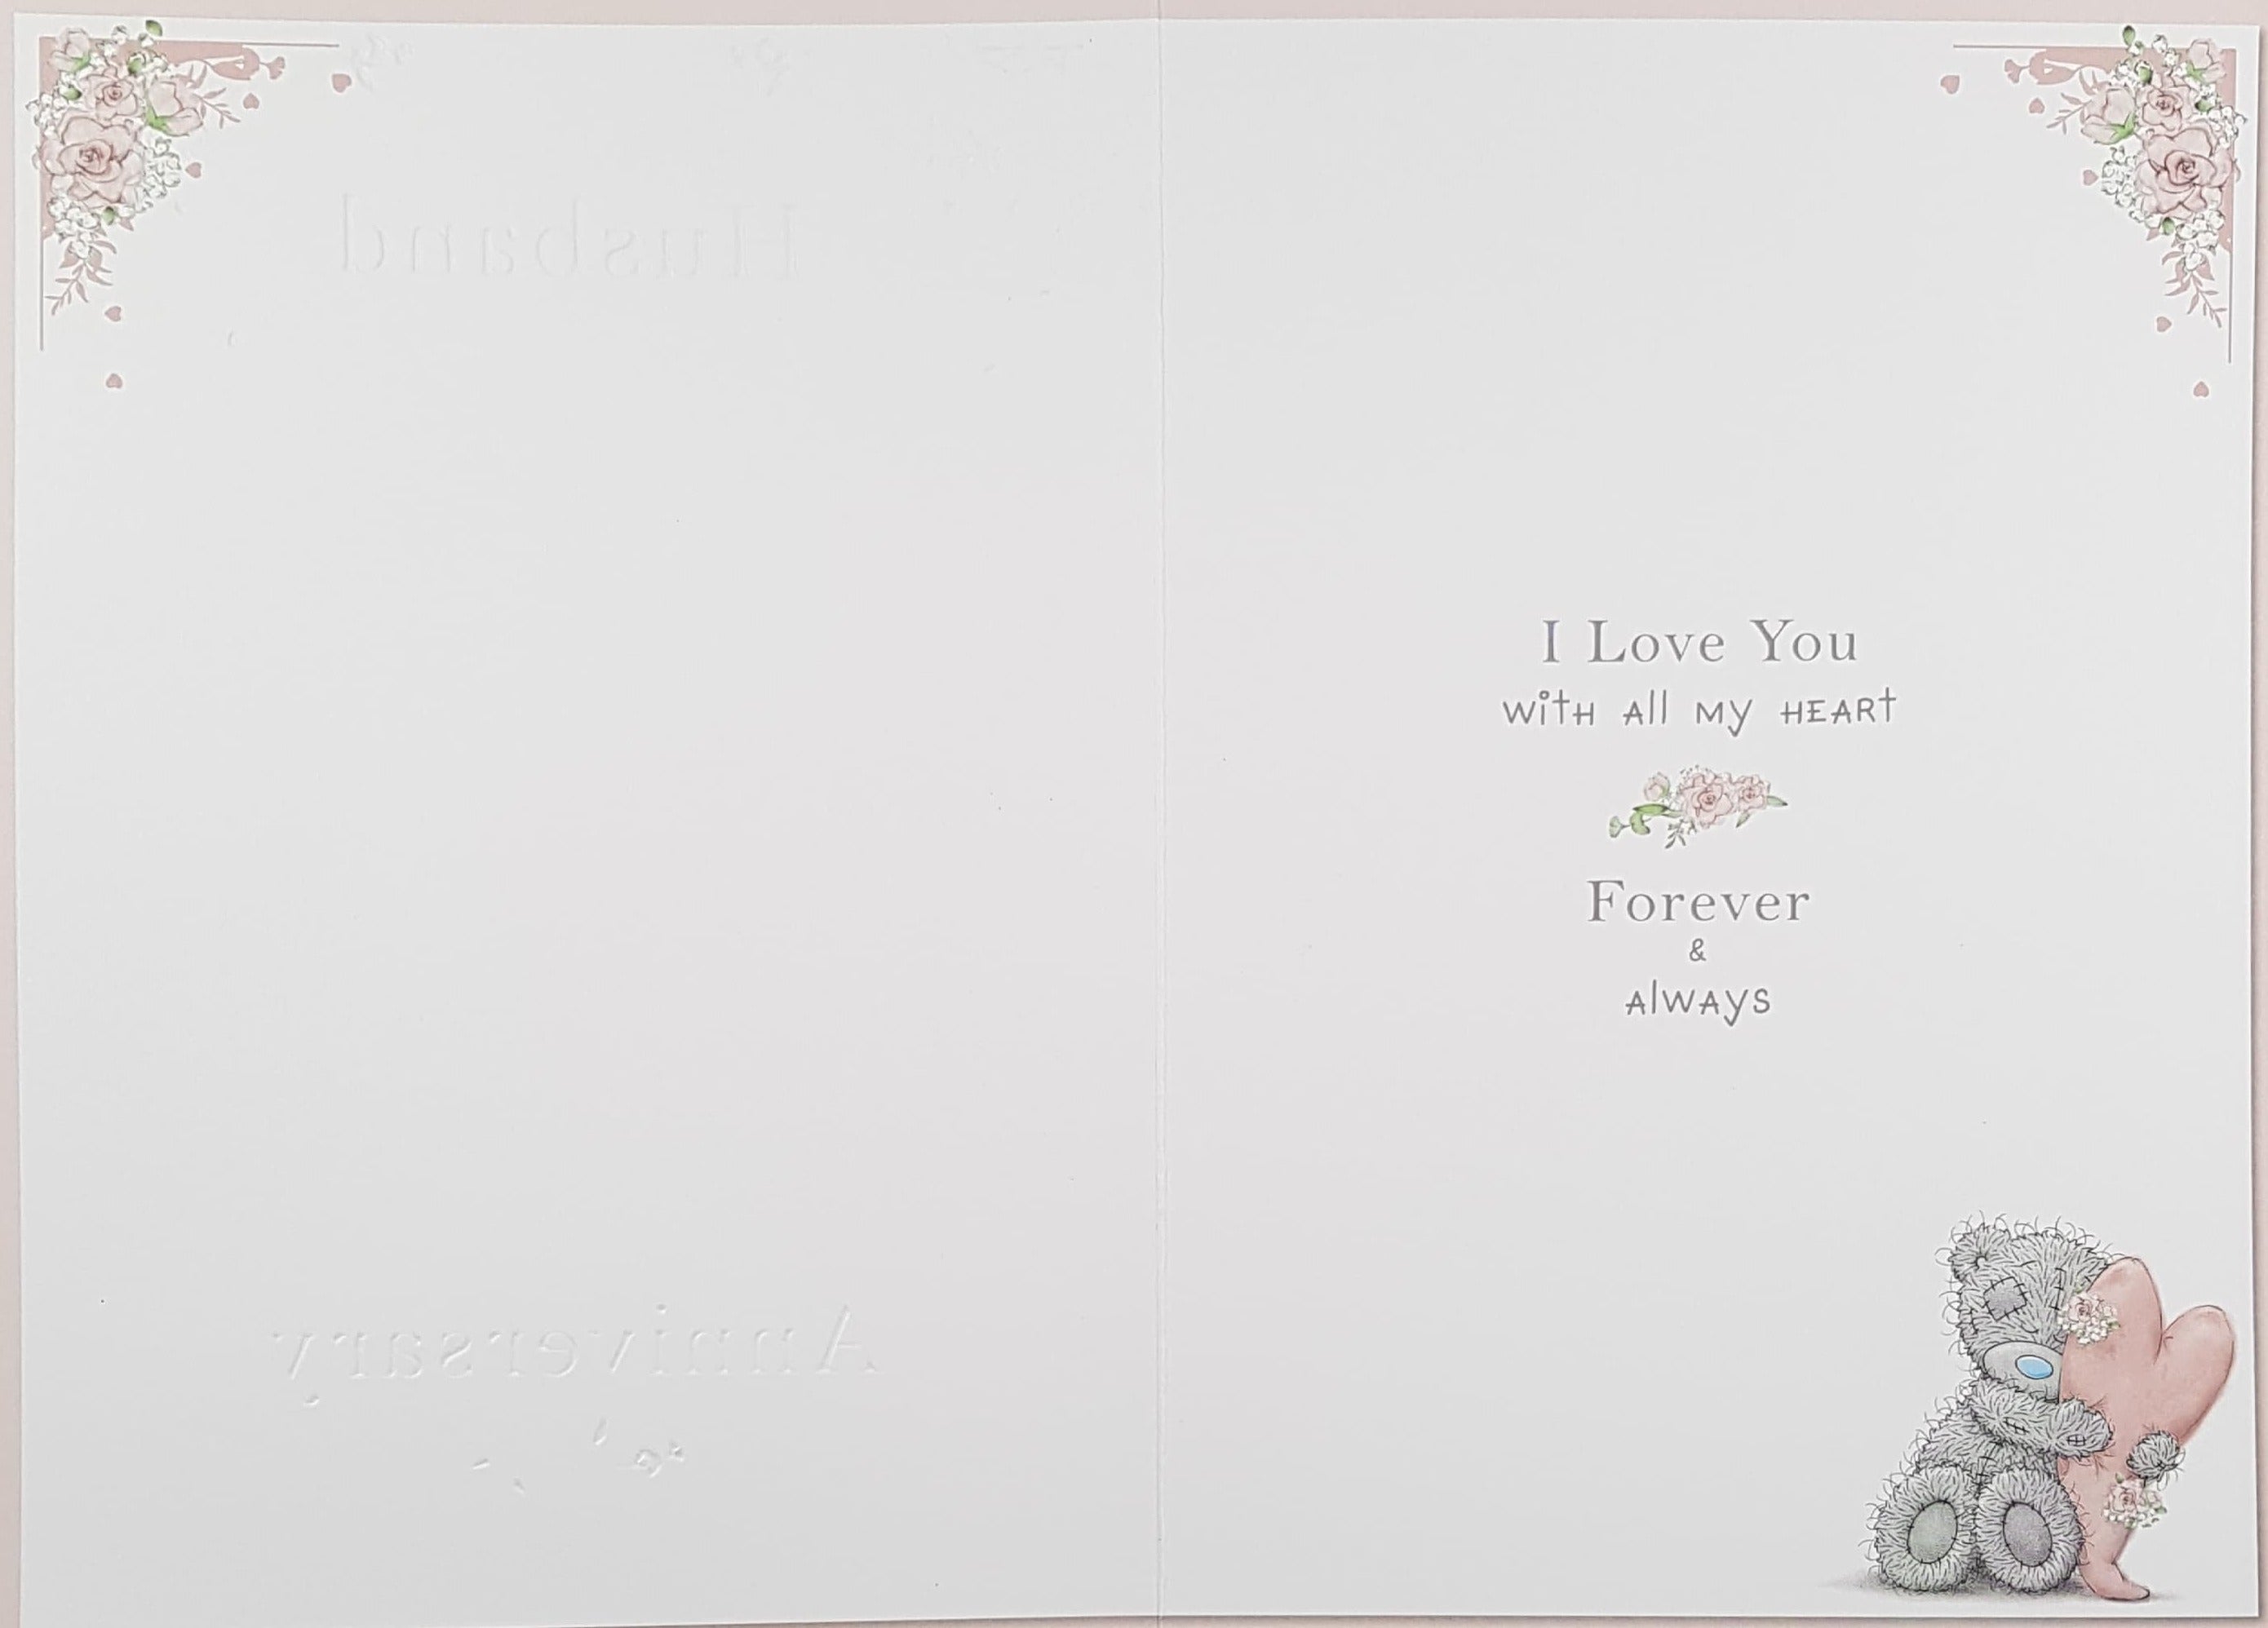 Anniversary Card - Husband / Teddy Holding Envelope Filled With Hearts